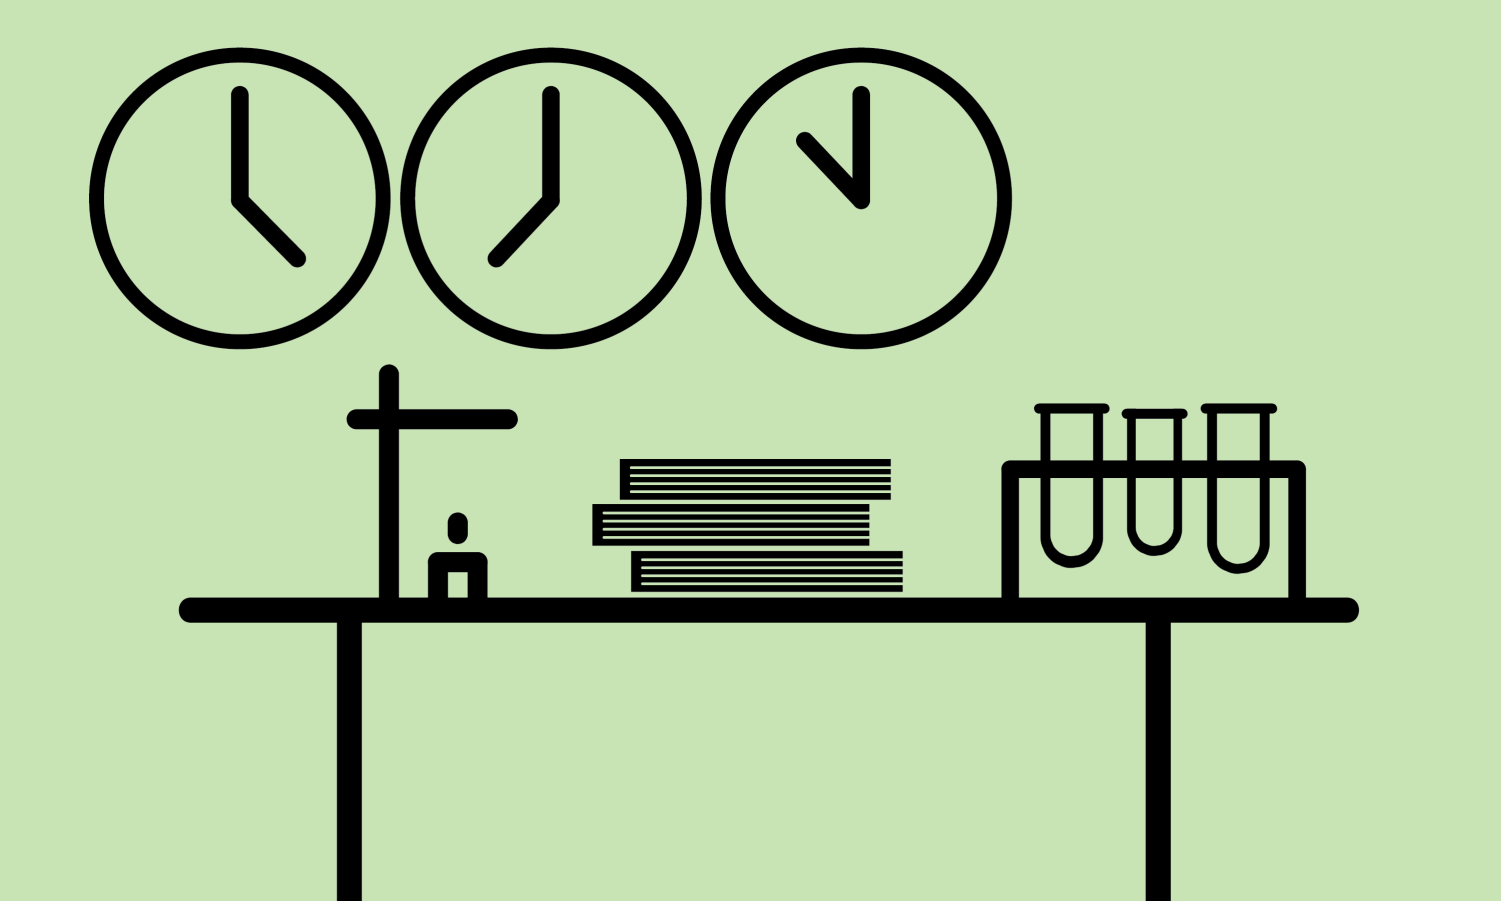 Table+with+three+test+tubes%2C+books+and+a+sink.+Three+clocks+located+above.